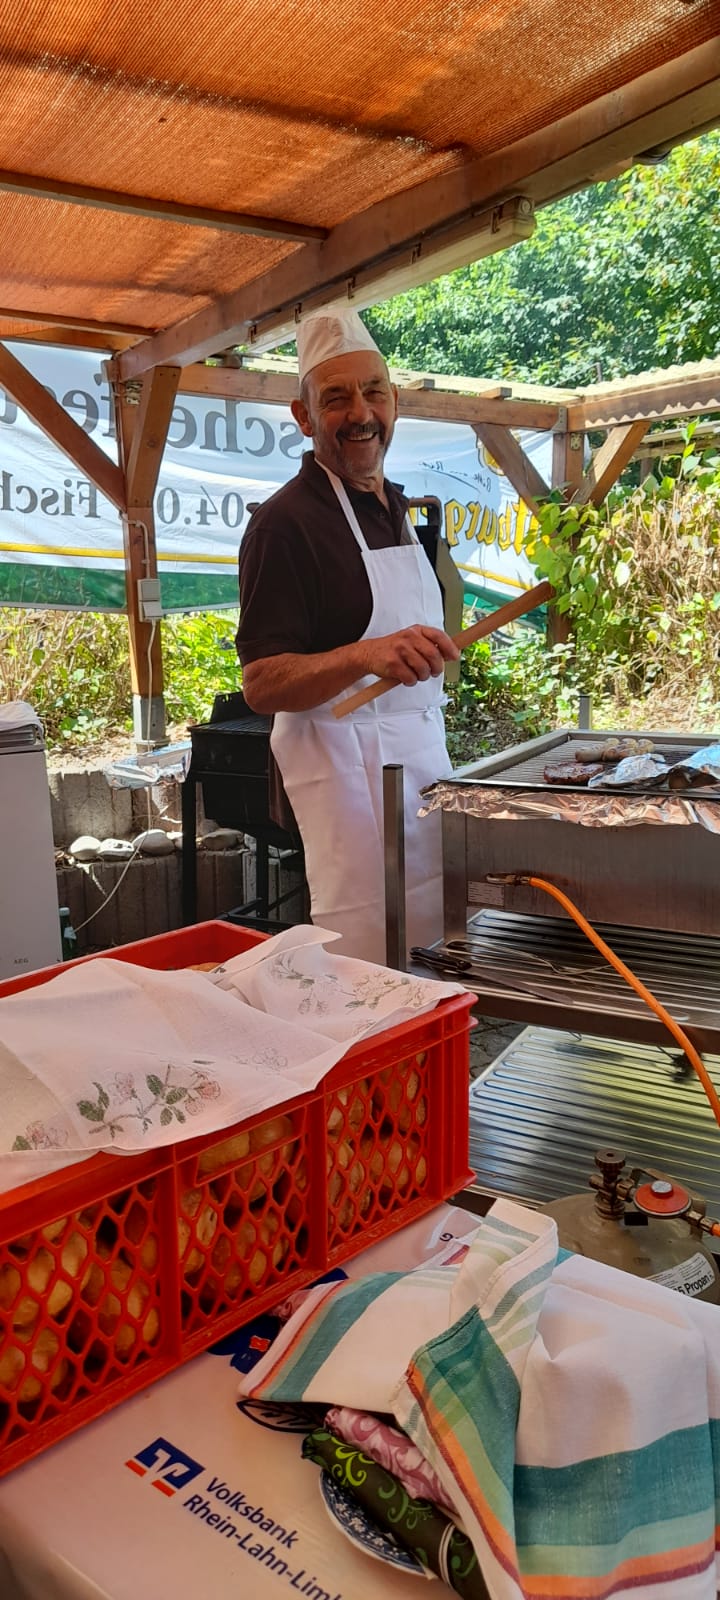 unsere Grillmeister Wolfgang hat bereits angeheizt